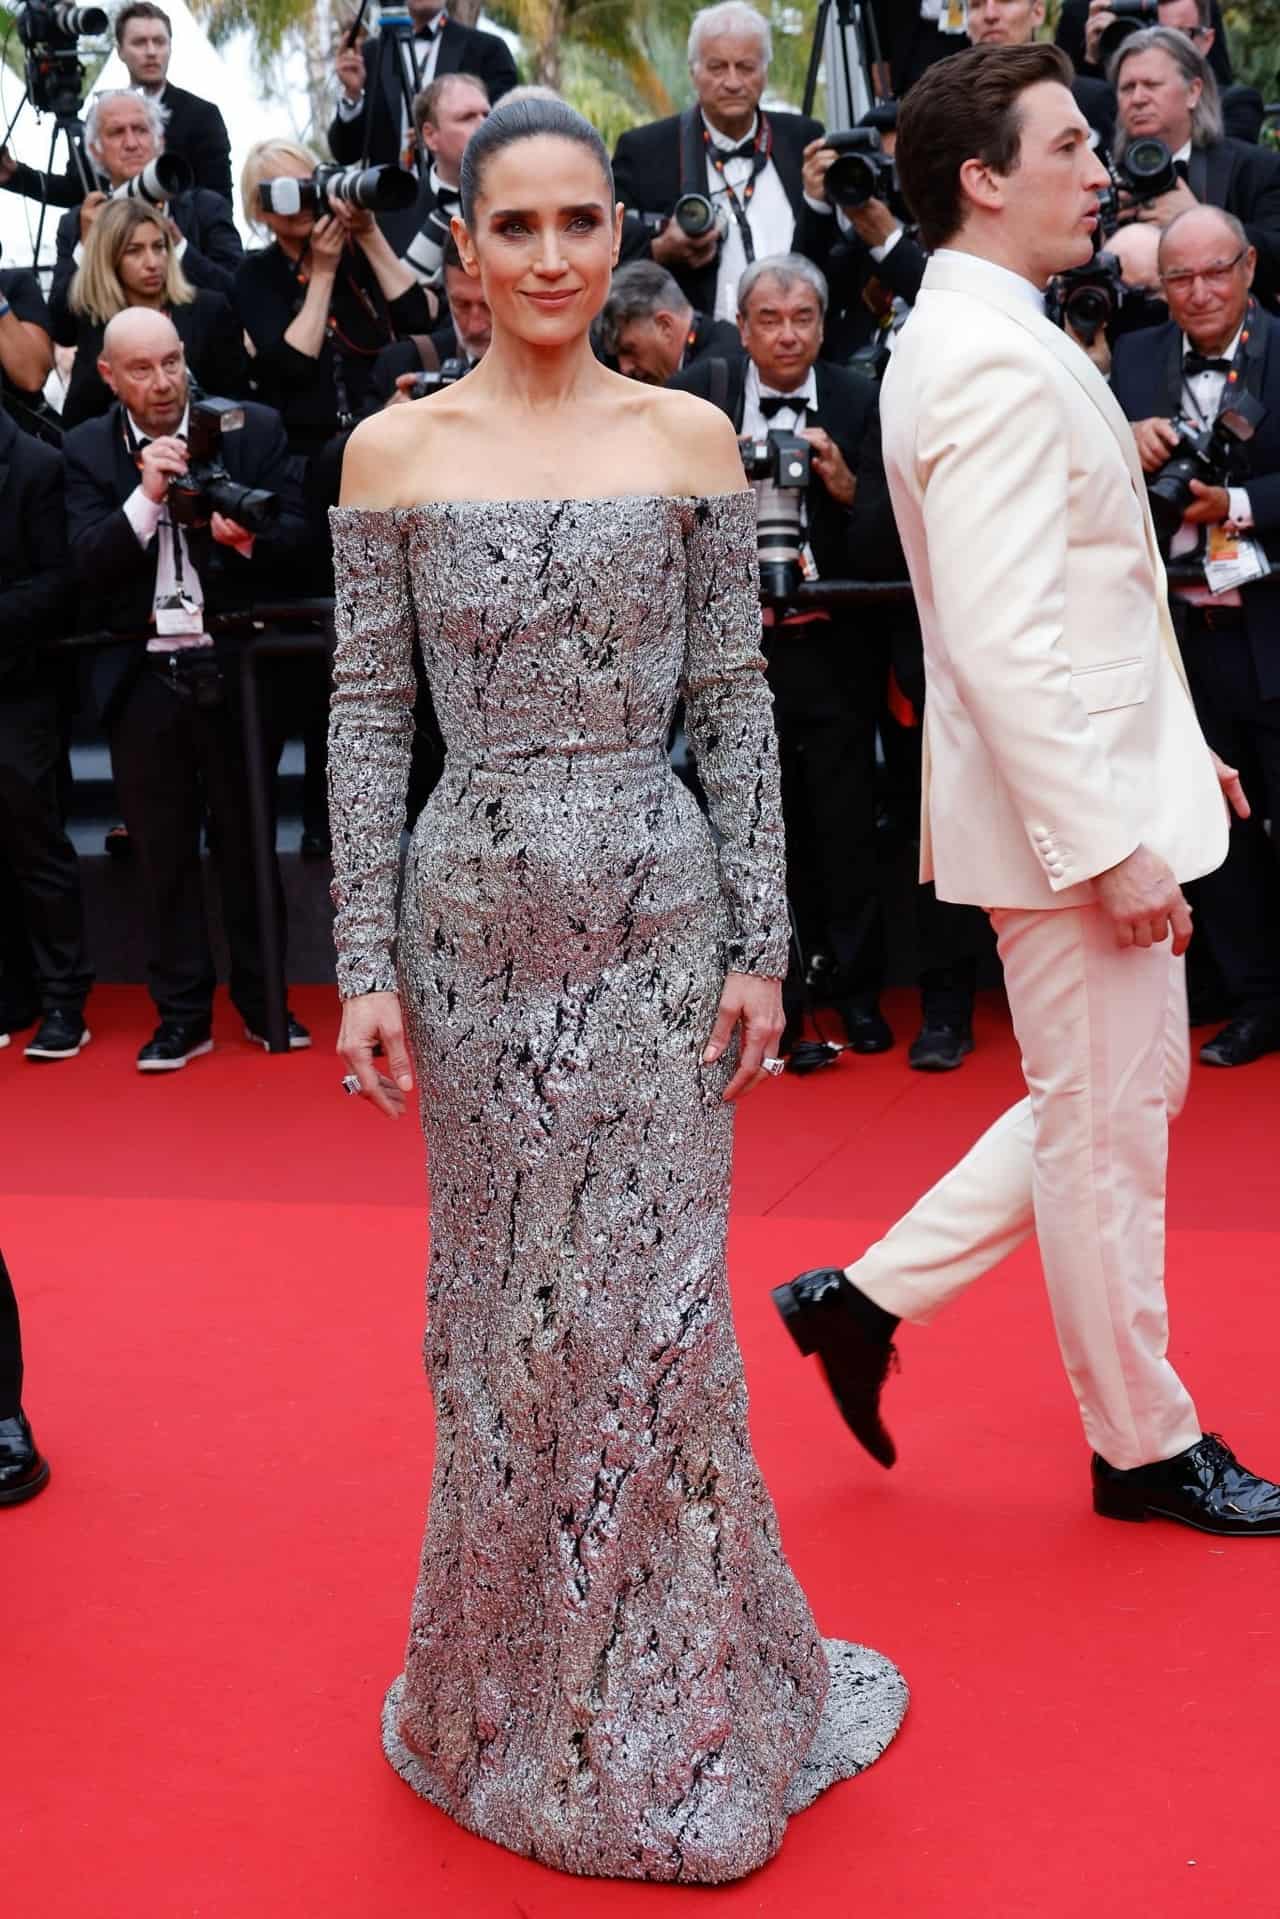 Jennifer Connelly Exudes Glamour in Silver Dress at Cannes Film Festival